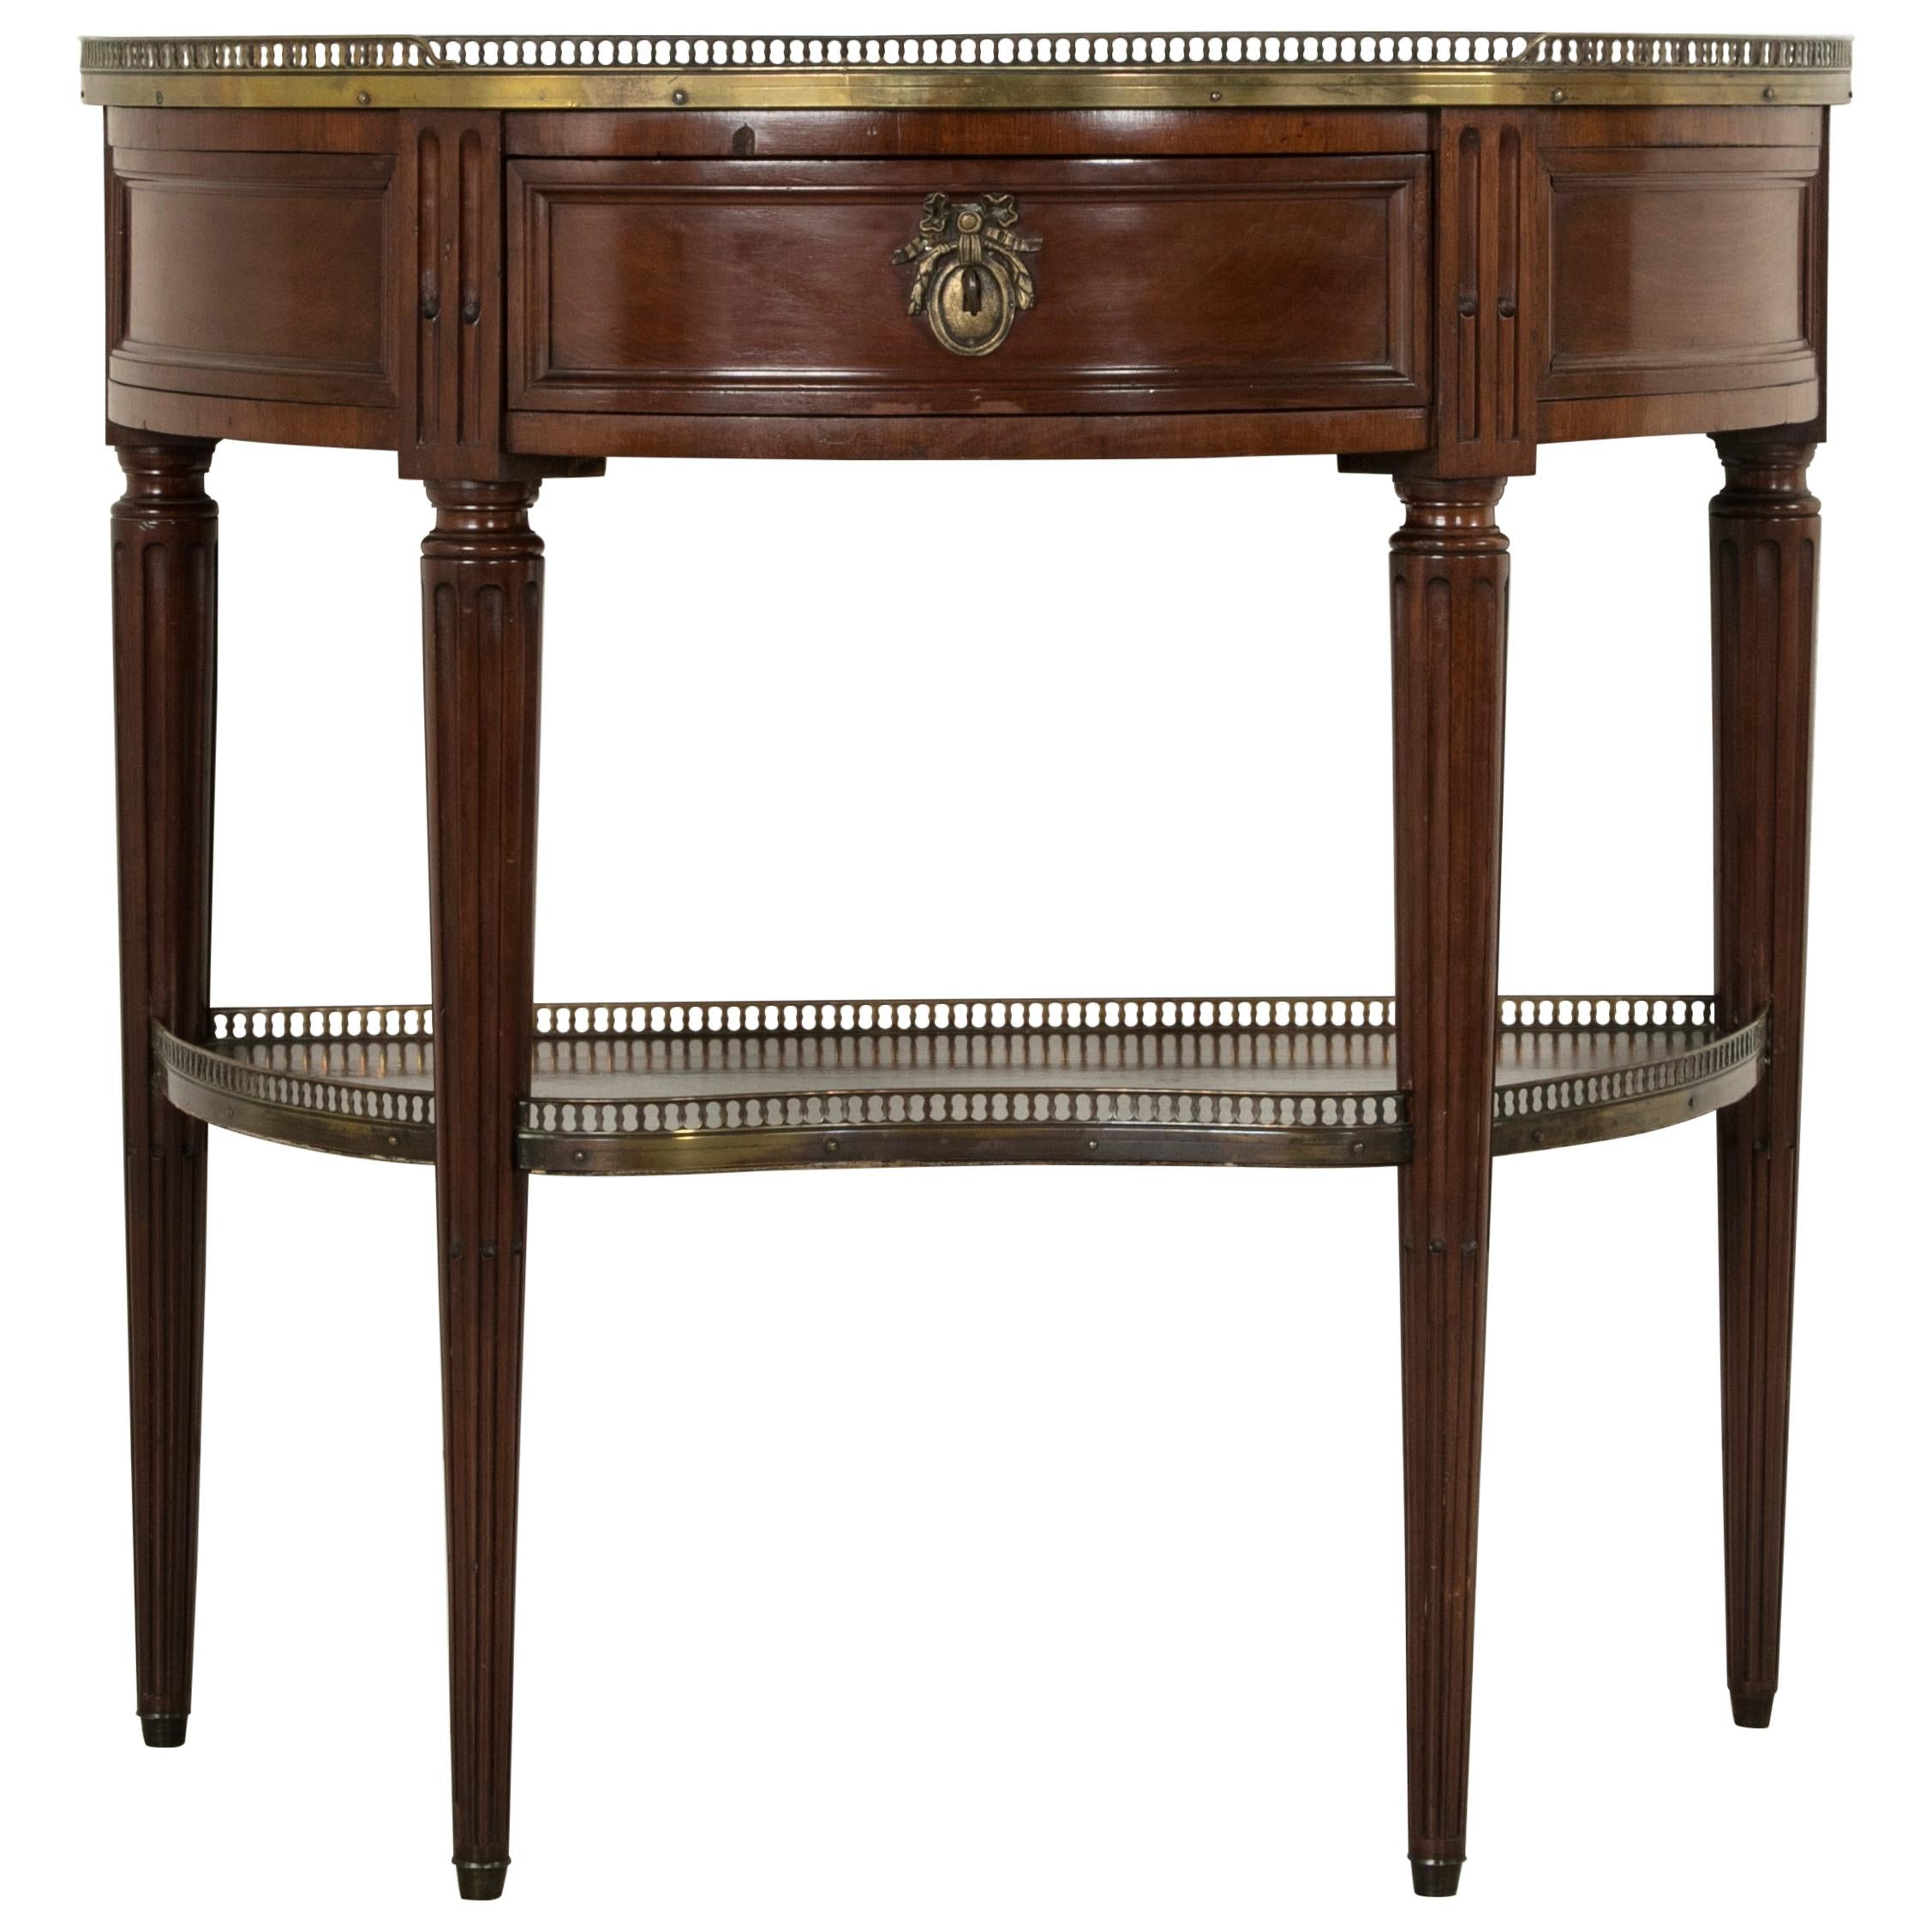 French Louis XVI Style Mahogany Demilune Console Table, Marble Top, circa 1900